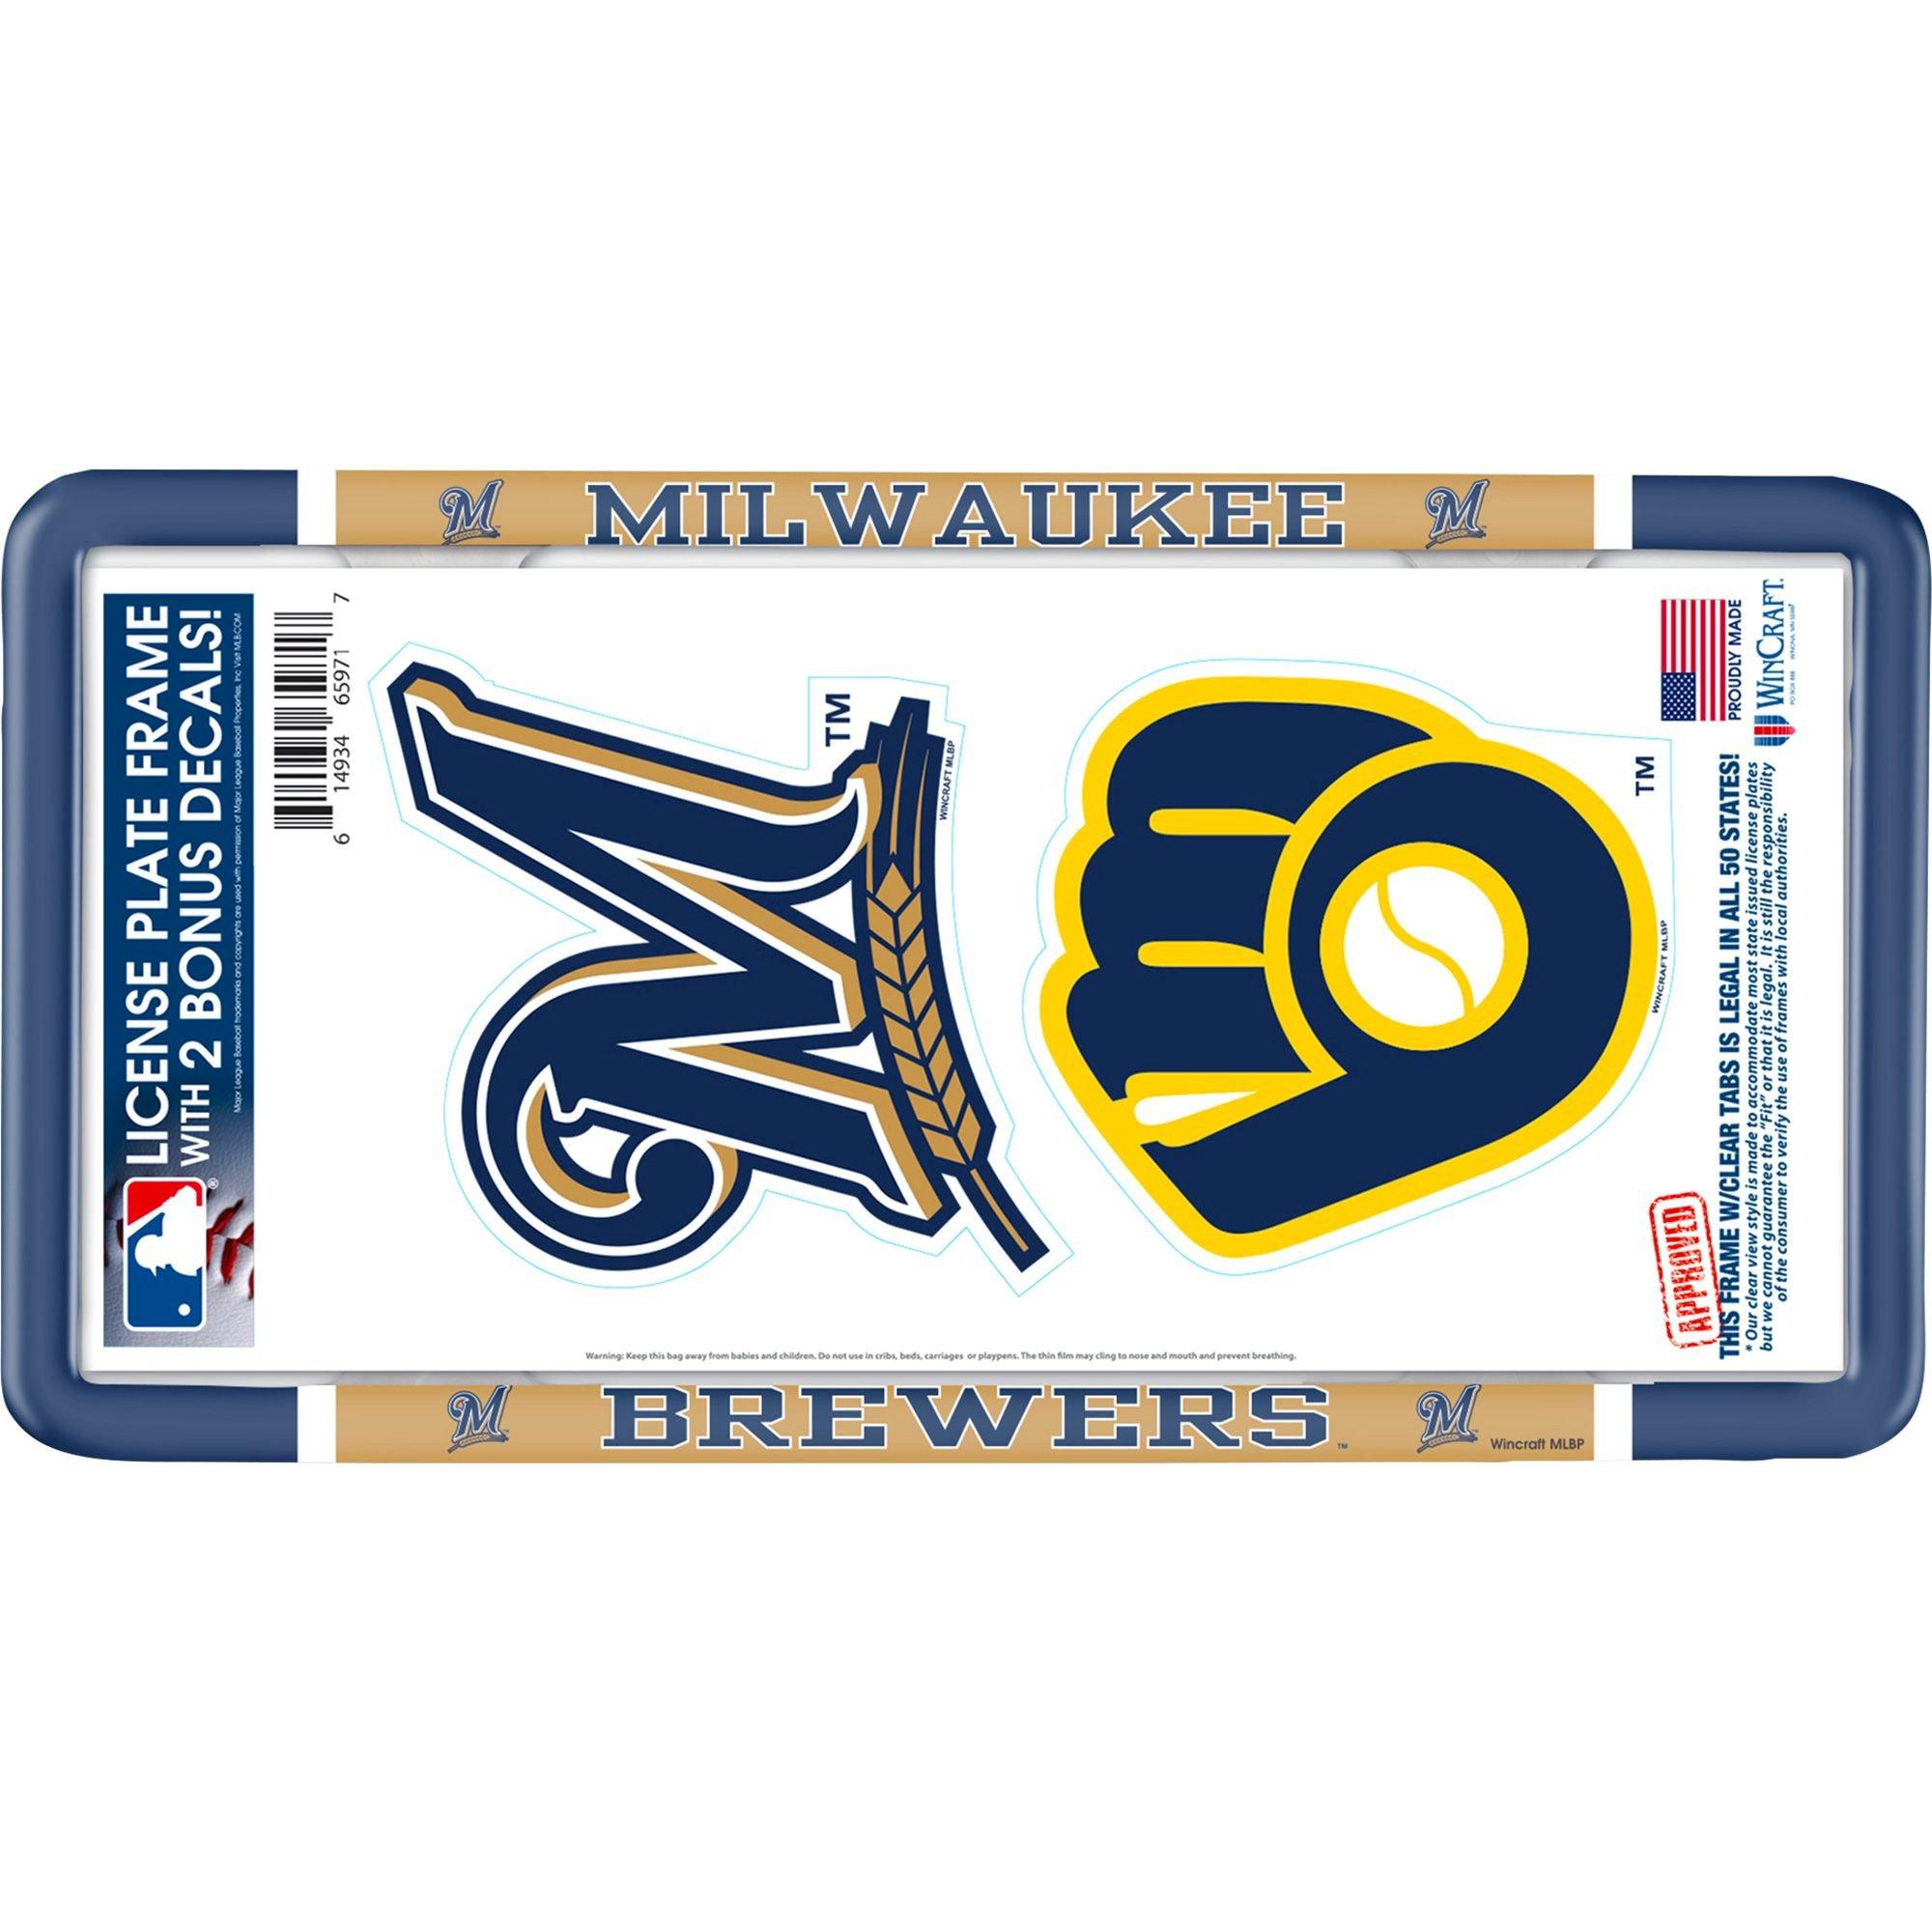 Milwaukee Brewers License Plate Frame with Decals 3pc | Party City